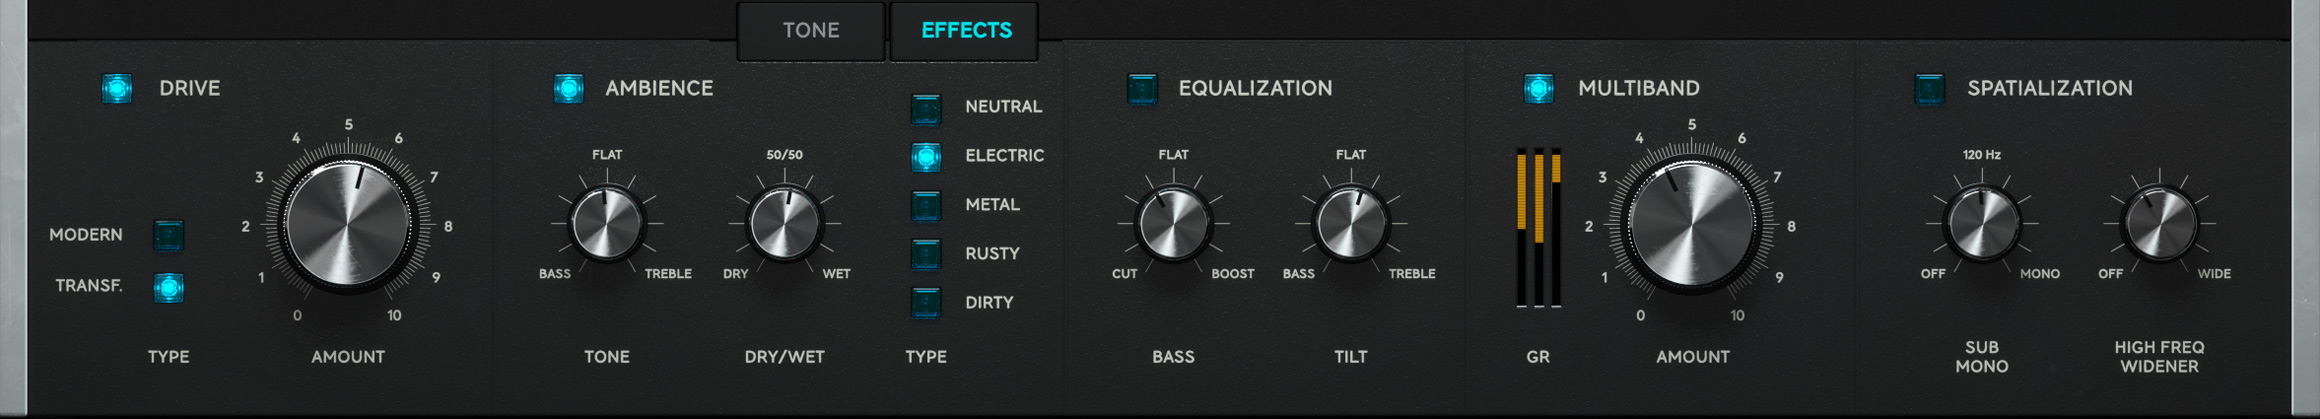 effects-section.jpg